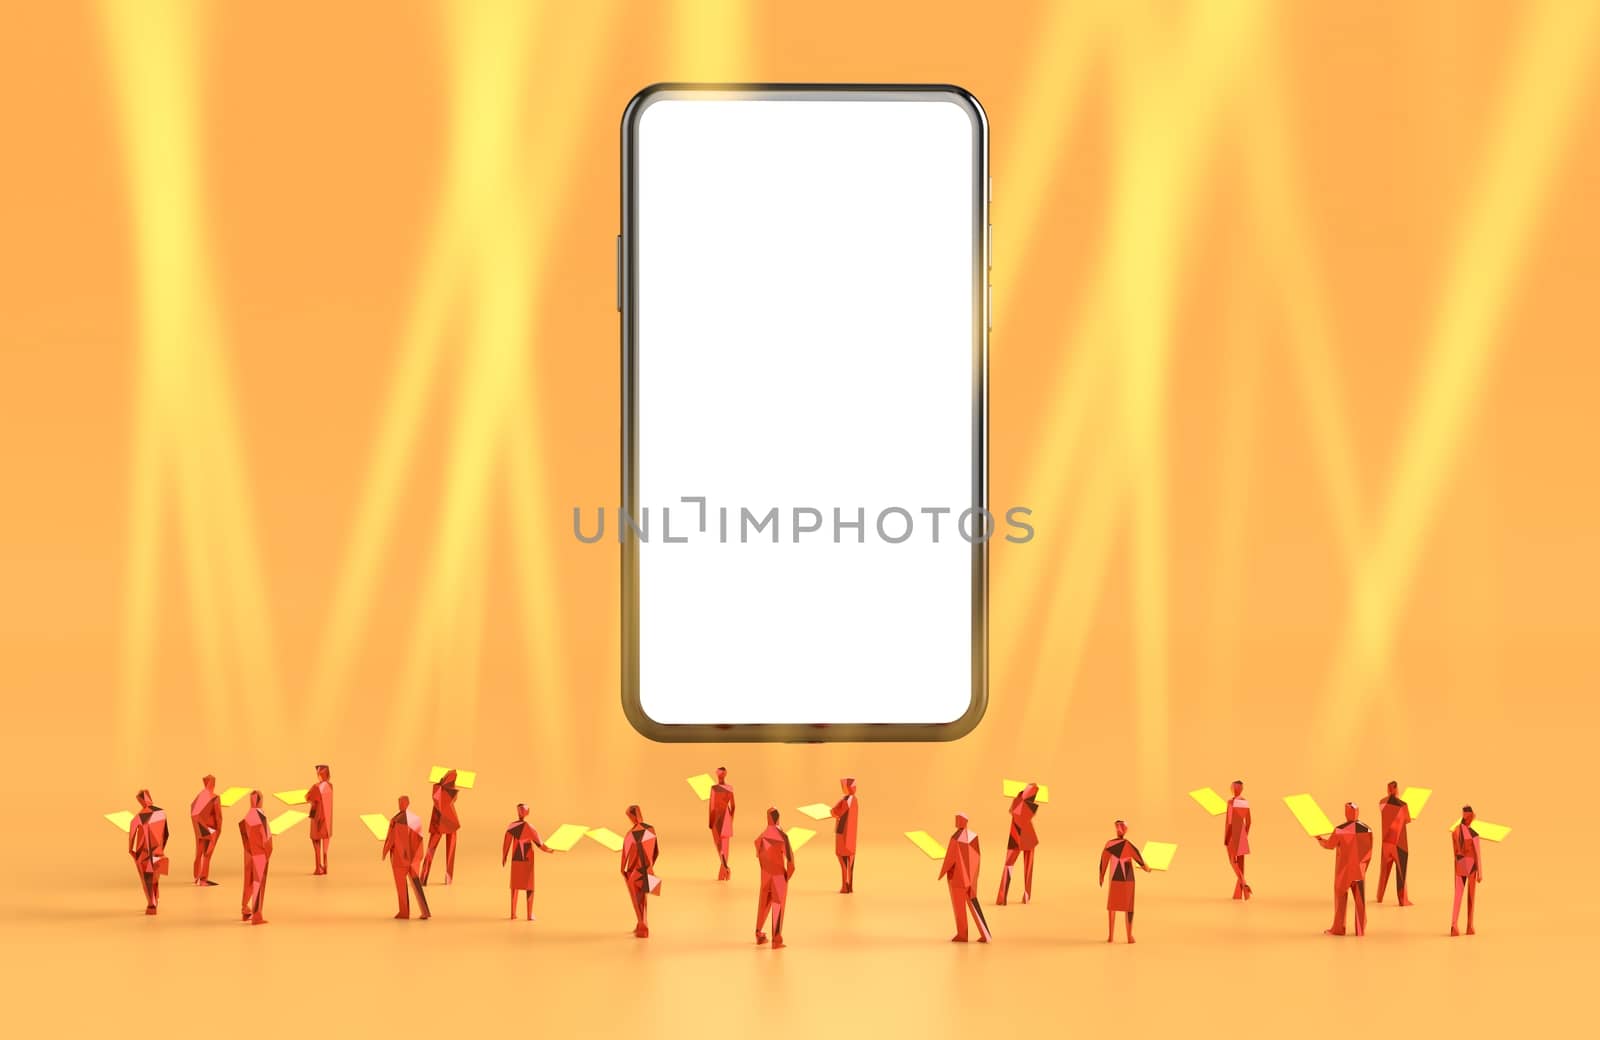 smartphone with a white screen for copy space. graphic of people looks at the smartphone screen. spotlight fog from mobile to in the air. in the orange background. news report concept. 3d illustration